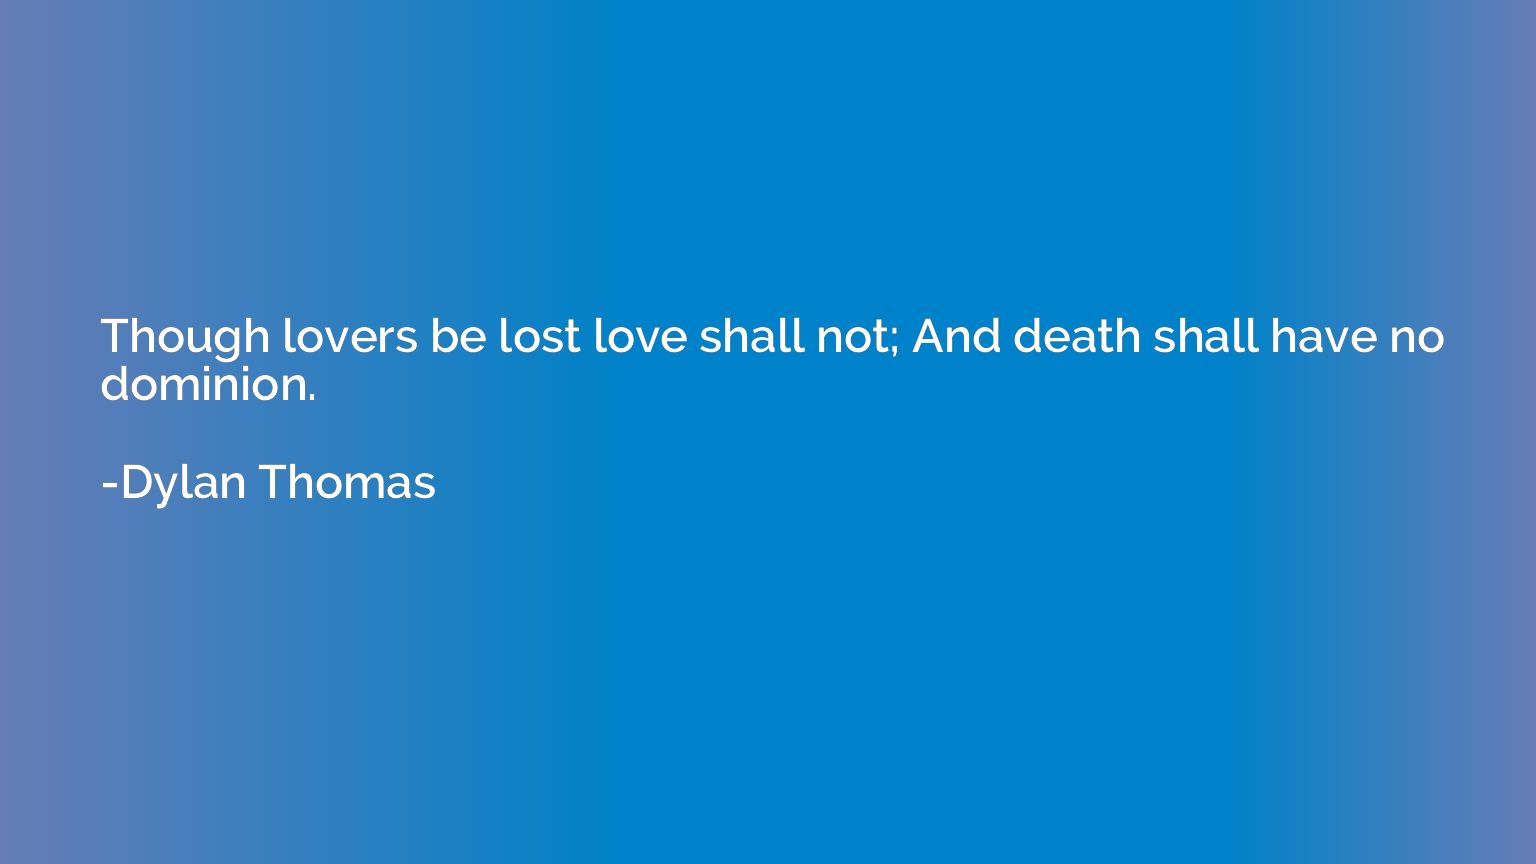 Though lovers be lost love shall not; And death shall have n